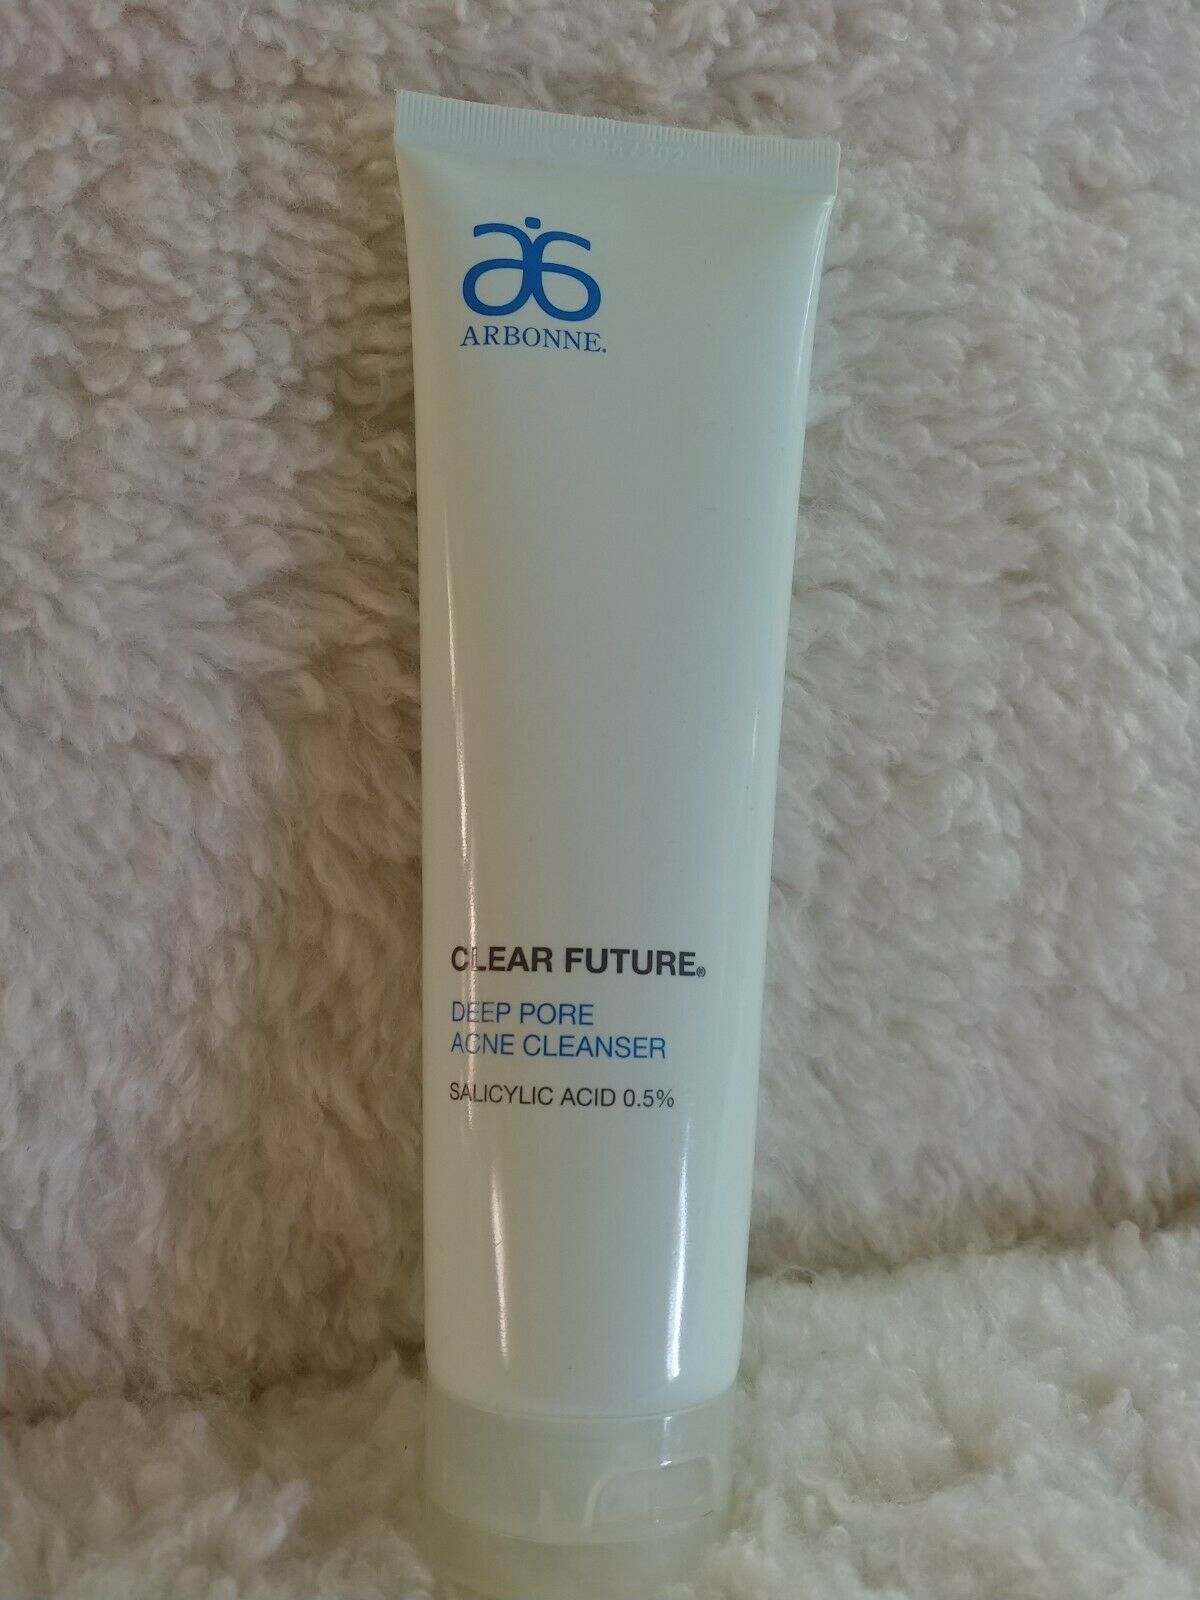 NEW Arbonne Clear Future Deep Pore Acne Cleanser FAST  SHIPPING! - $71.99